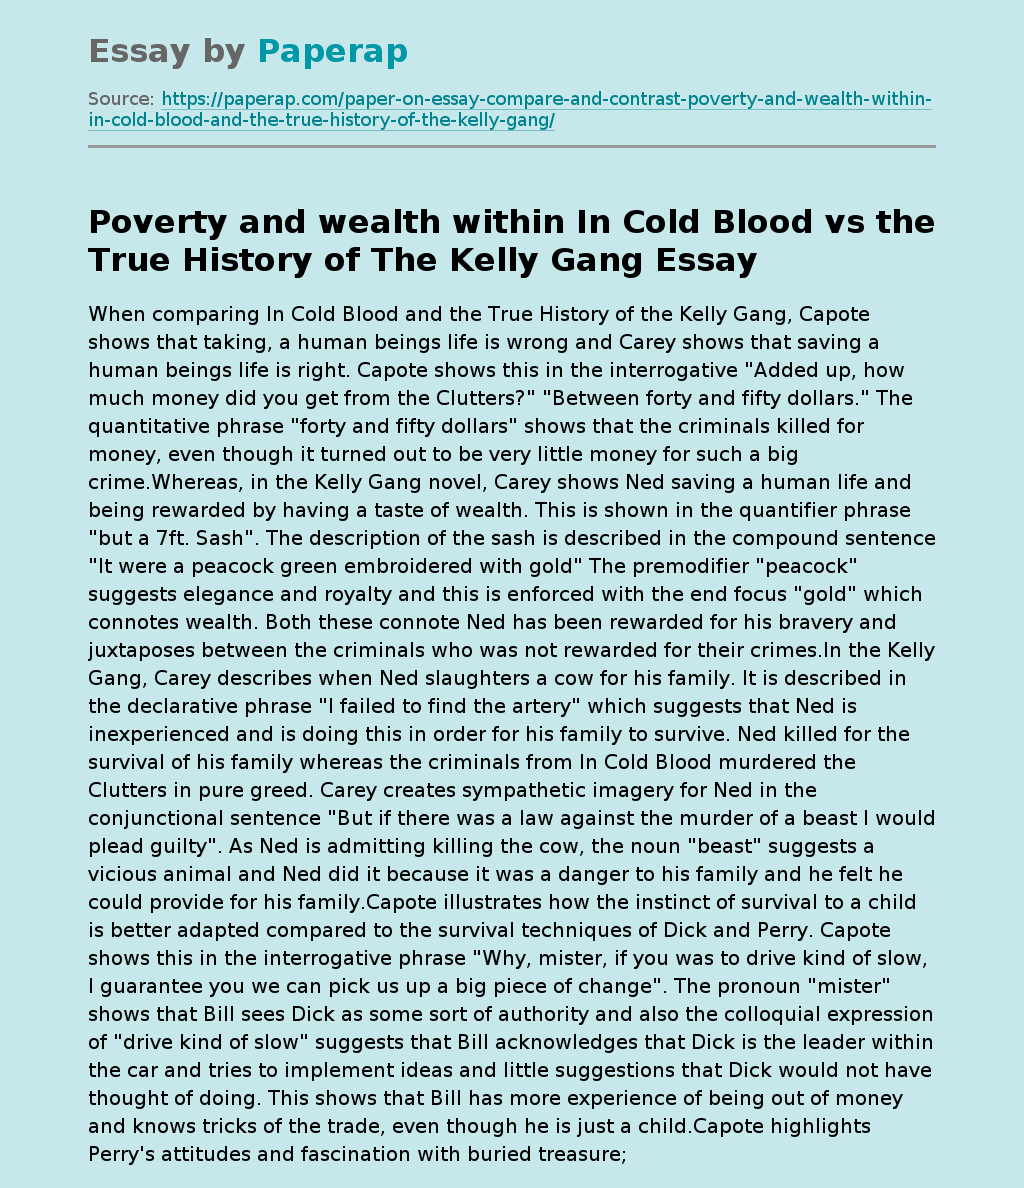 Poverty and wealth within In Cold Blood vs the True History of The Kelly Gang